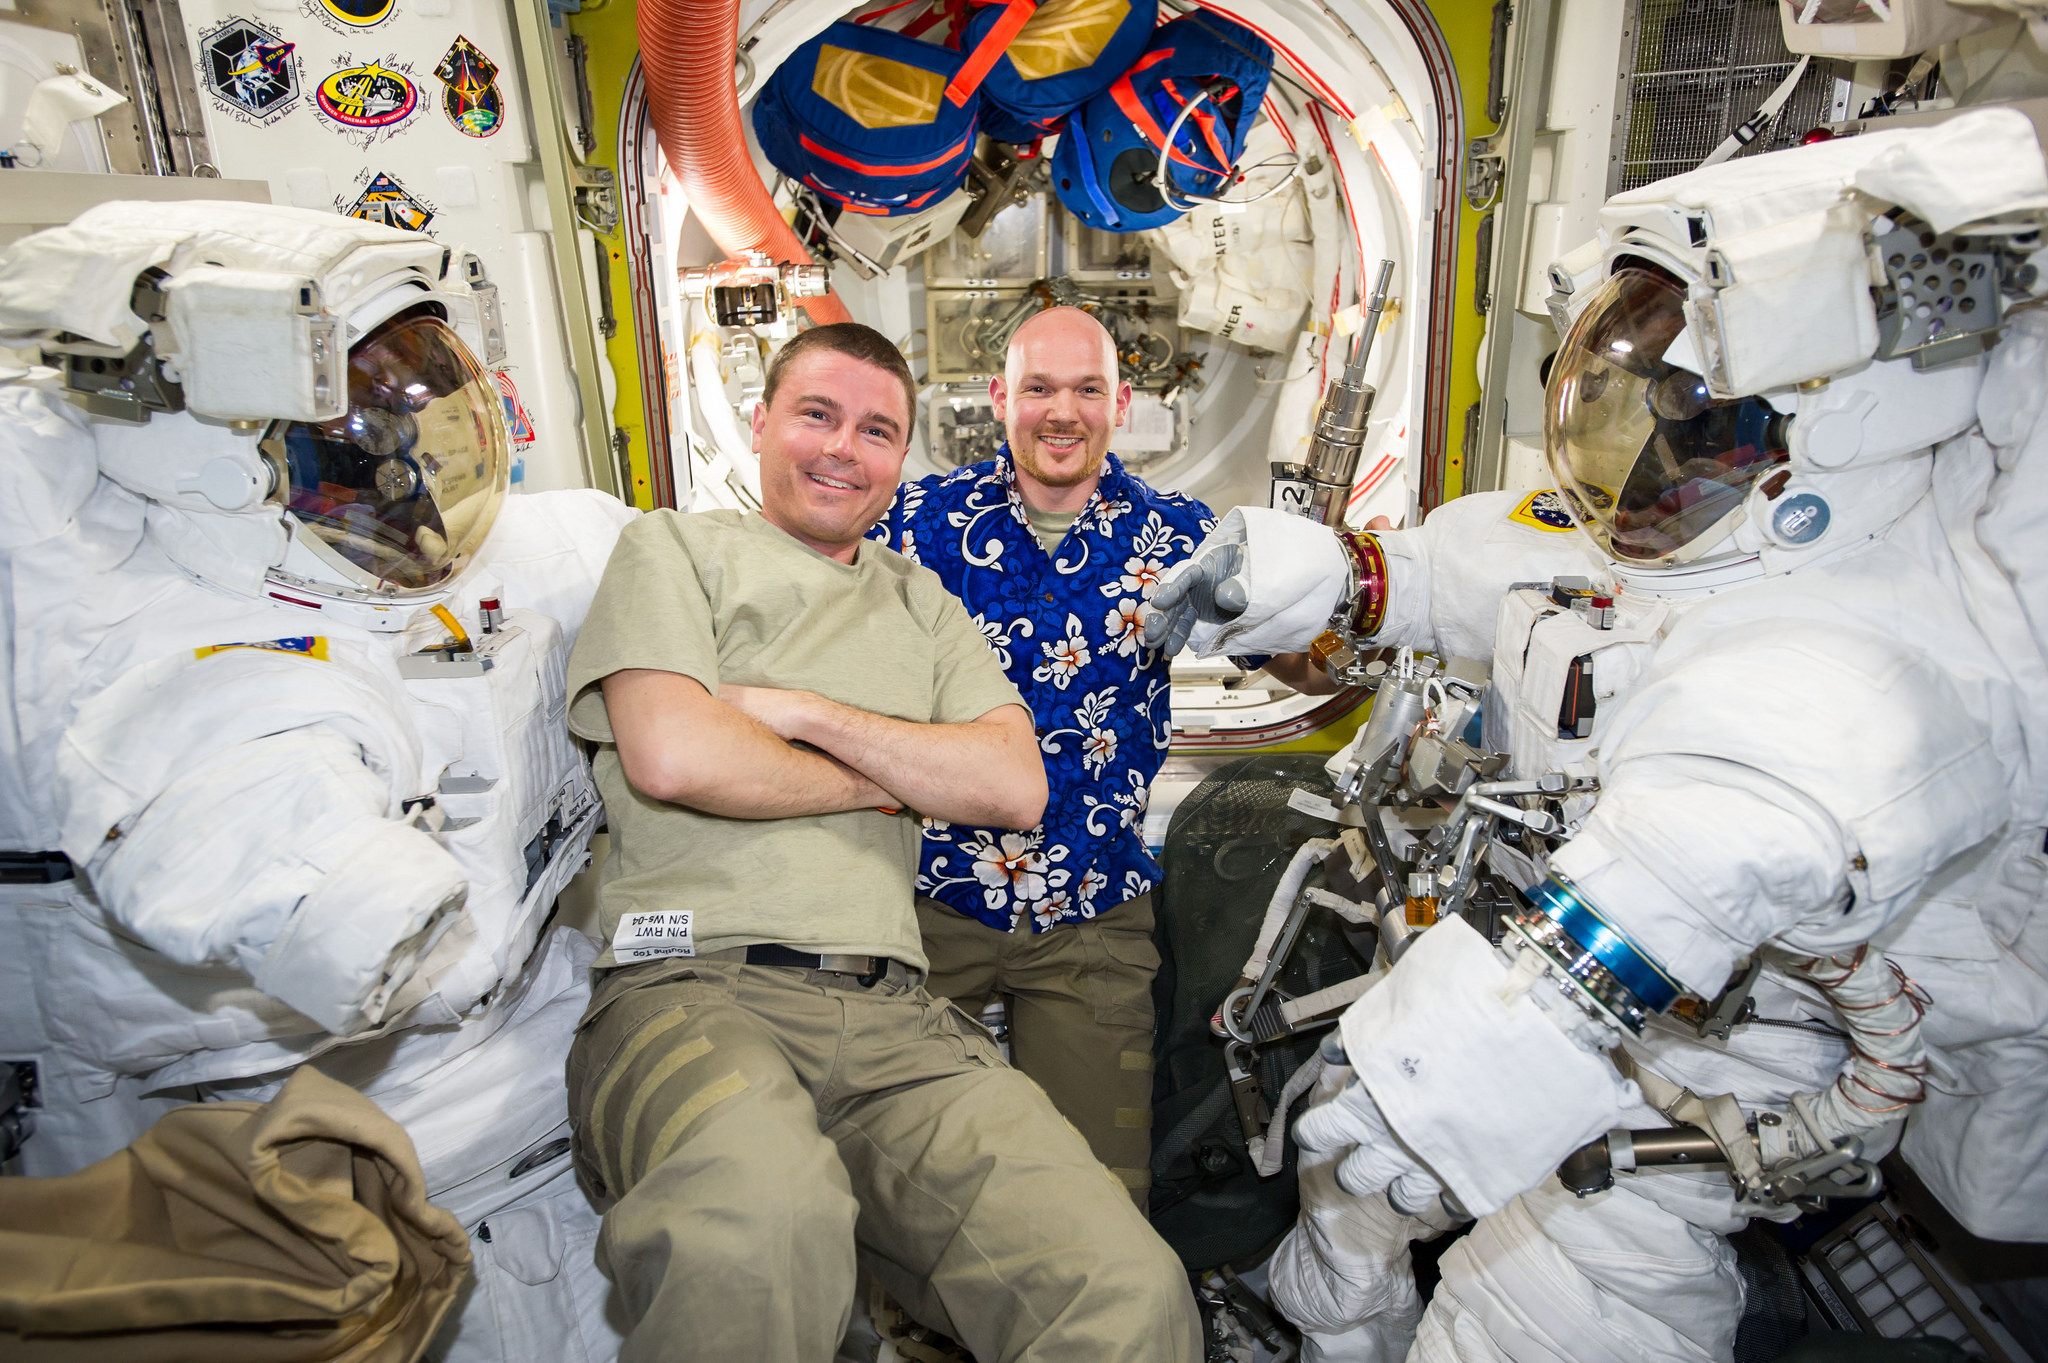 Astronauts Reid Wiseman and Alexander Gerst work with two spacesuits in the Quest airlock of the International Space Station while preparing for two spacewalks.